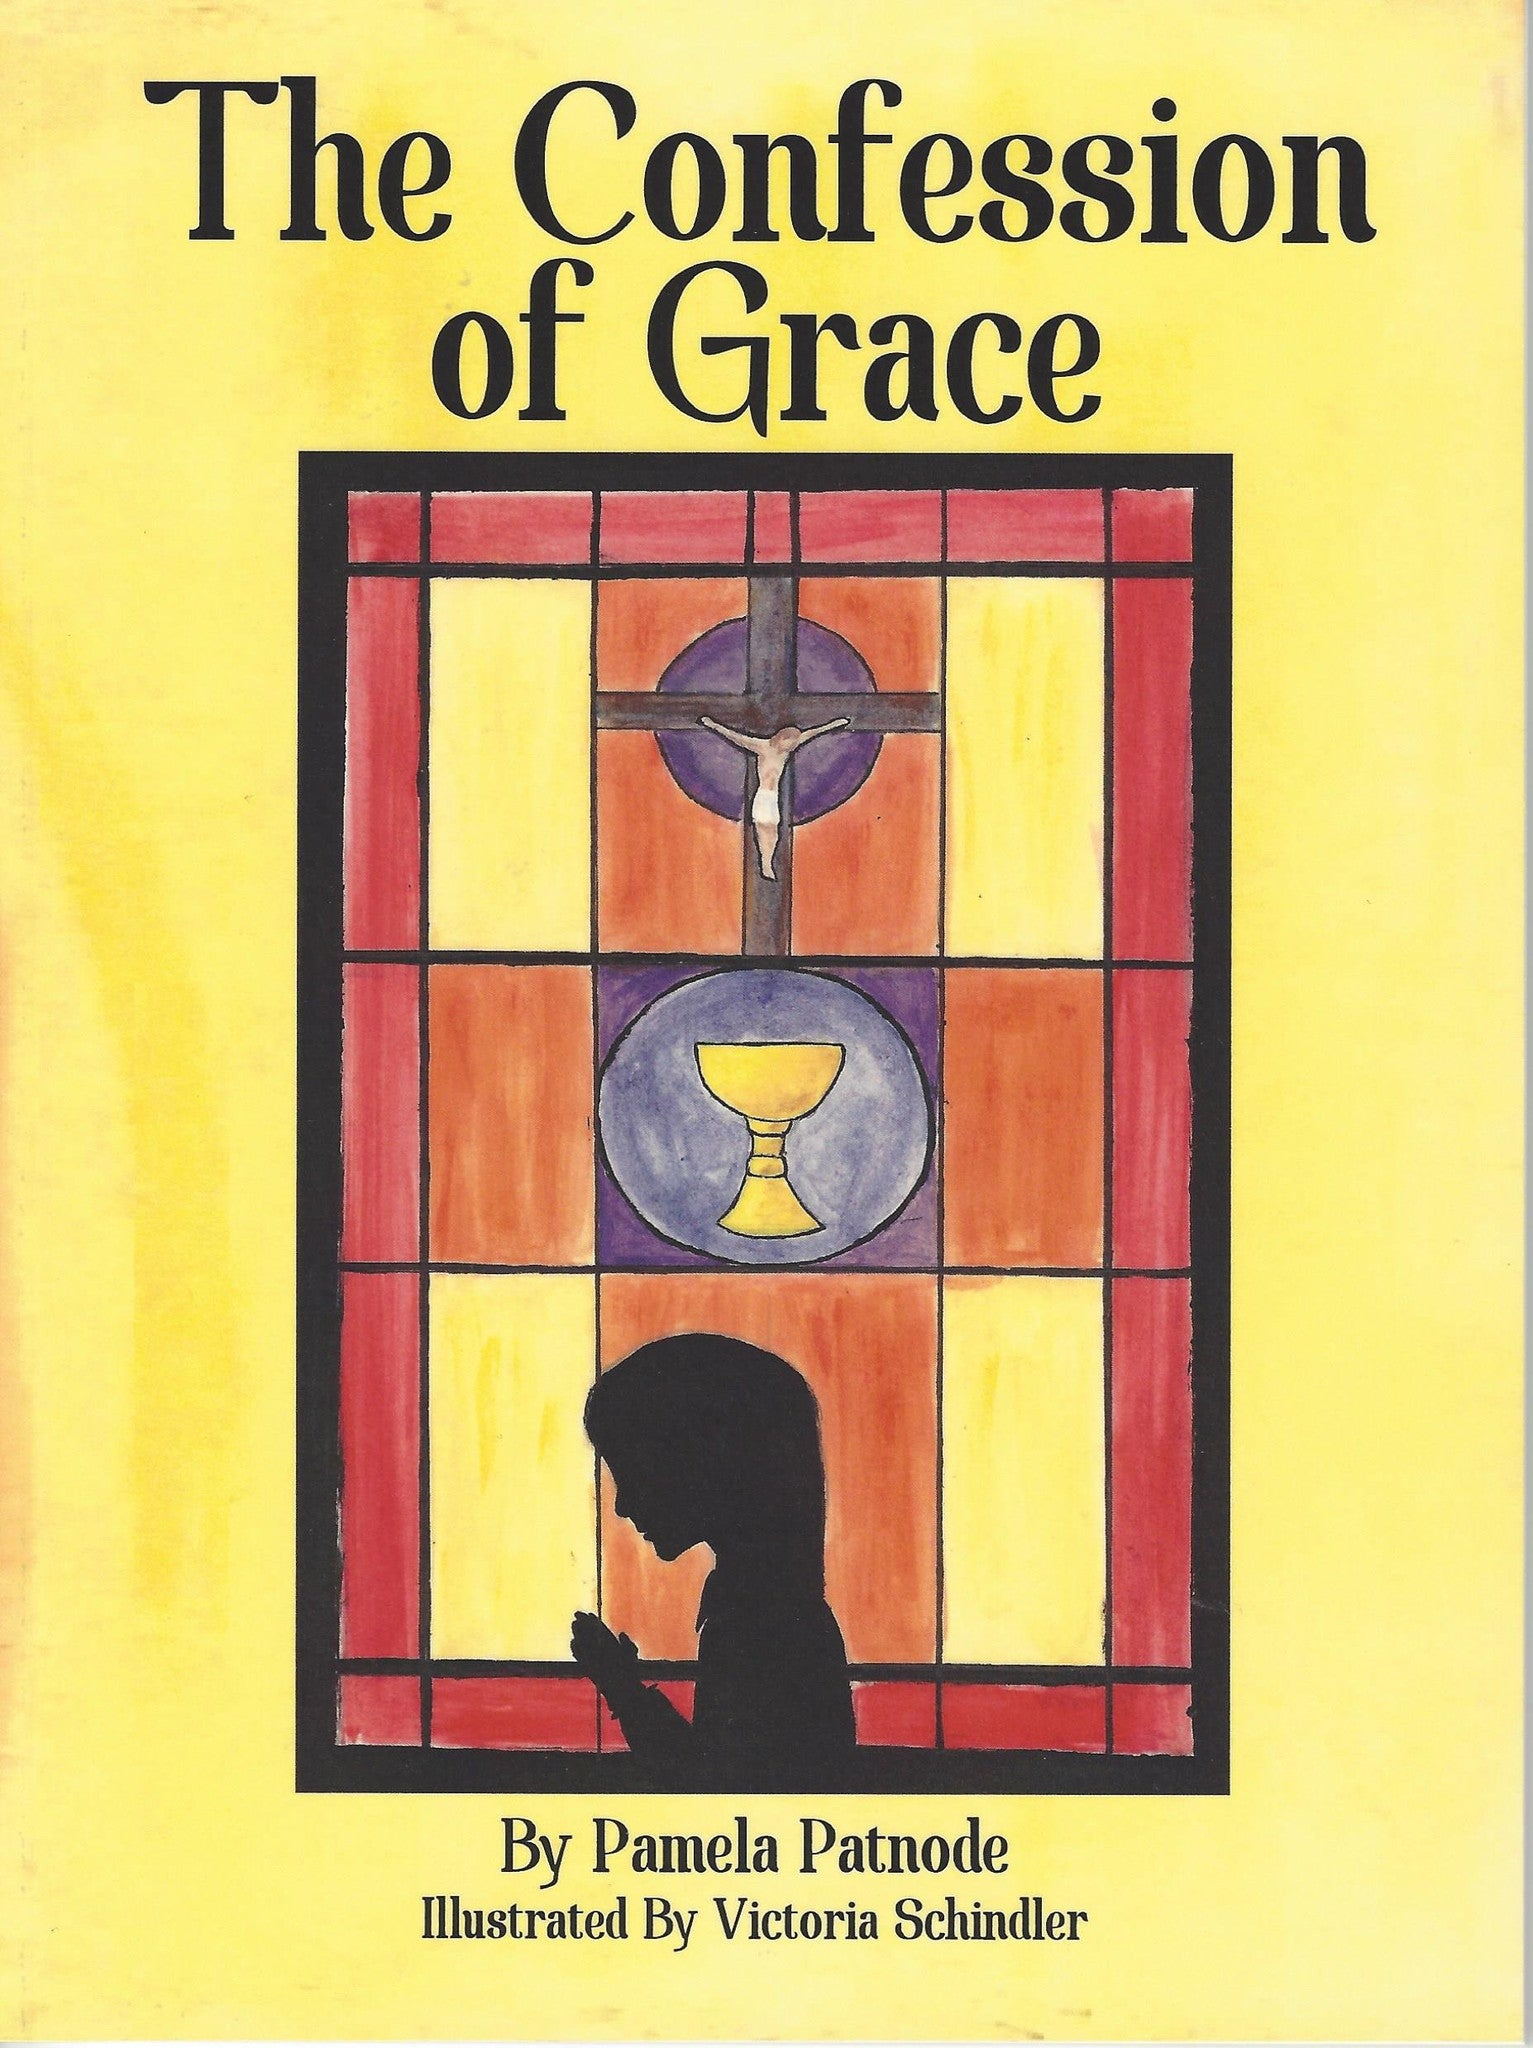 The Confession of Grace